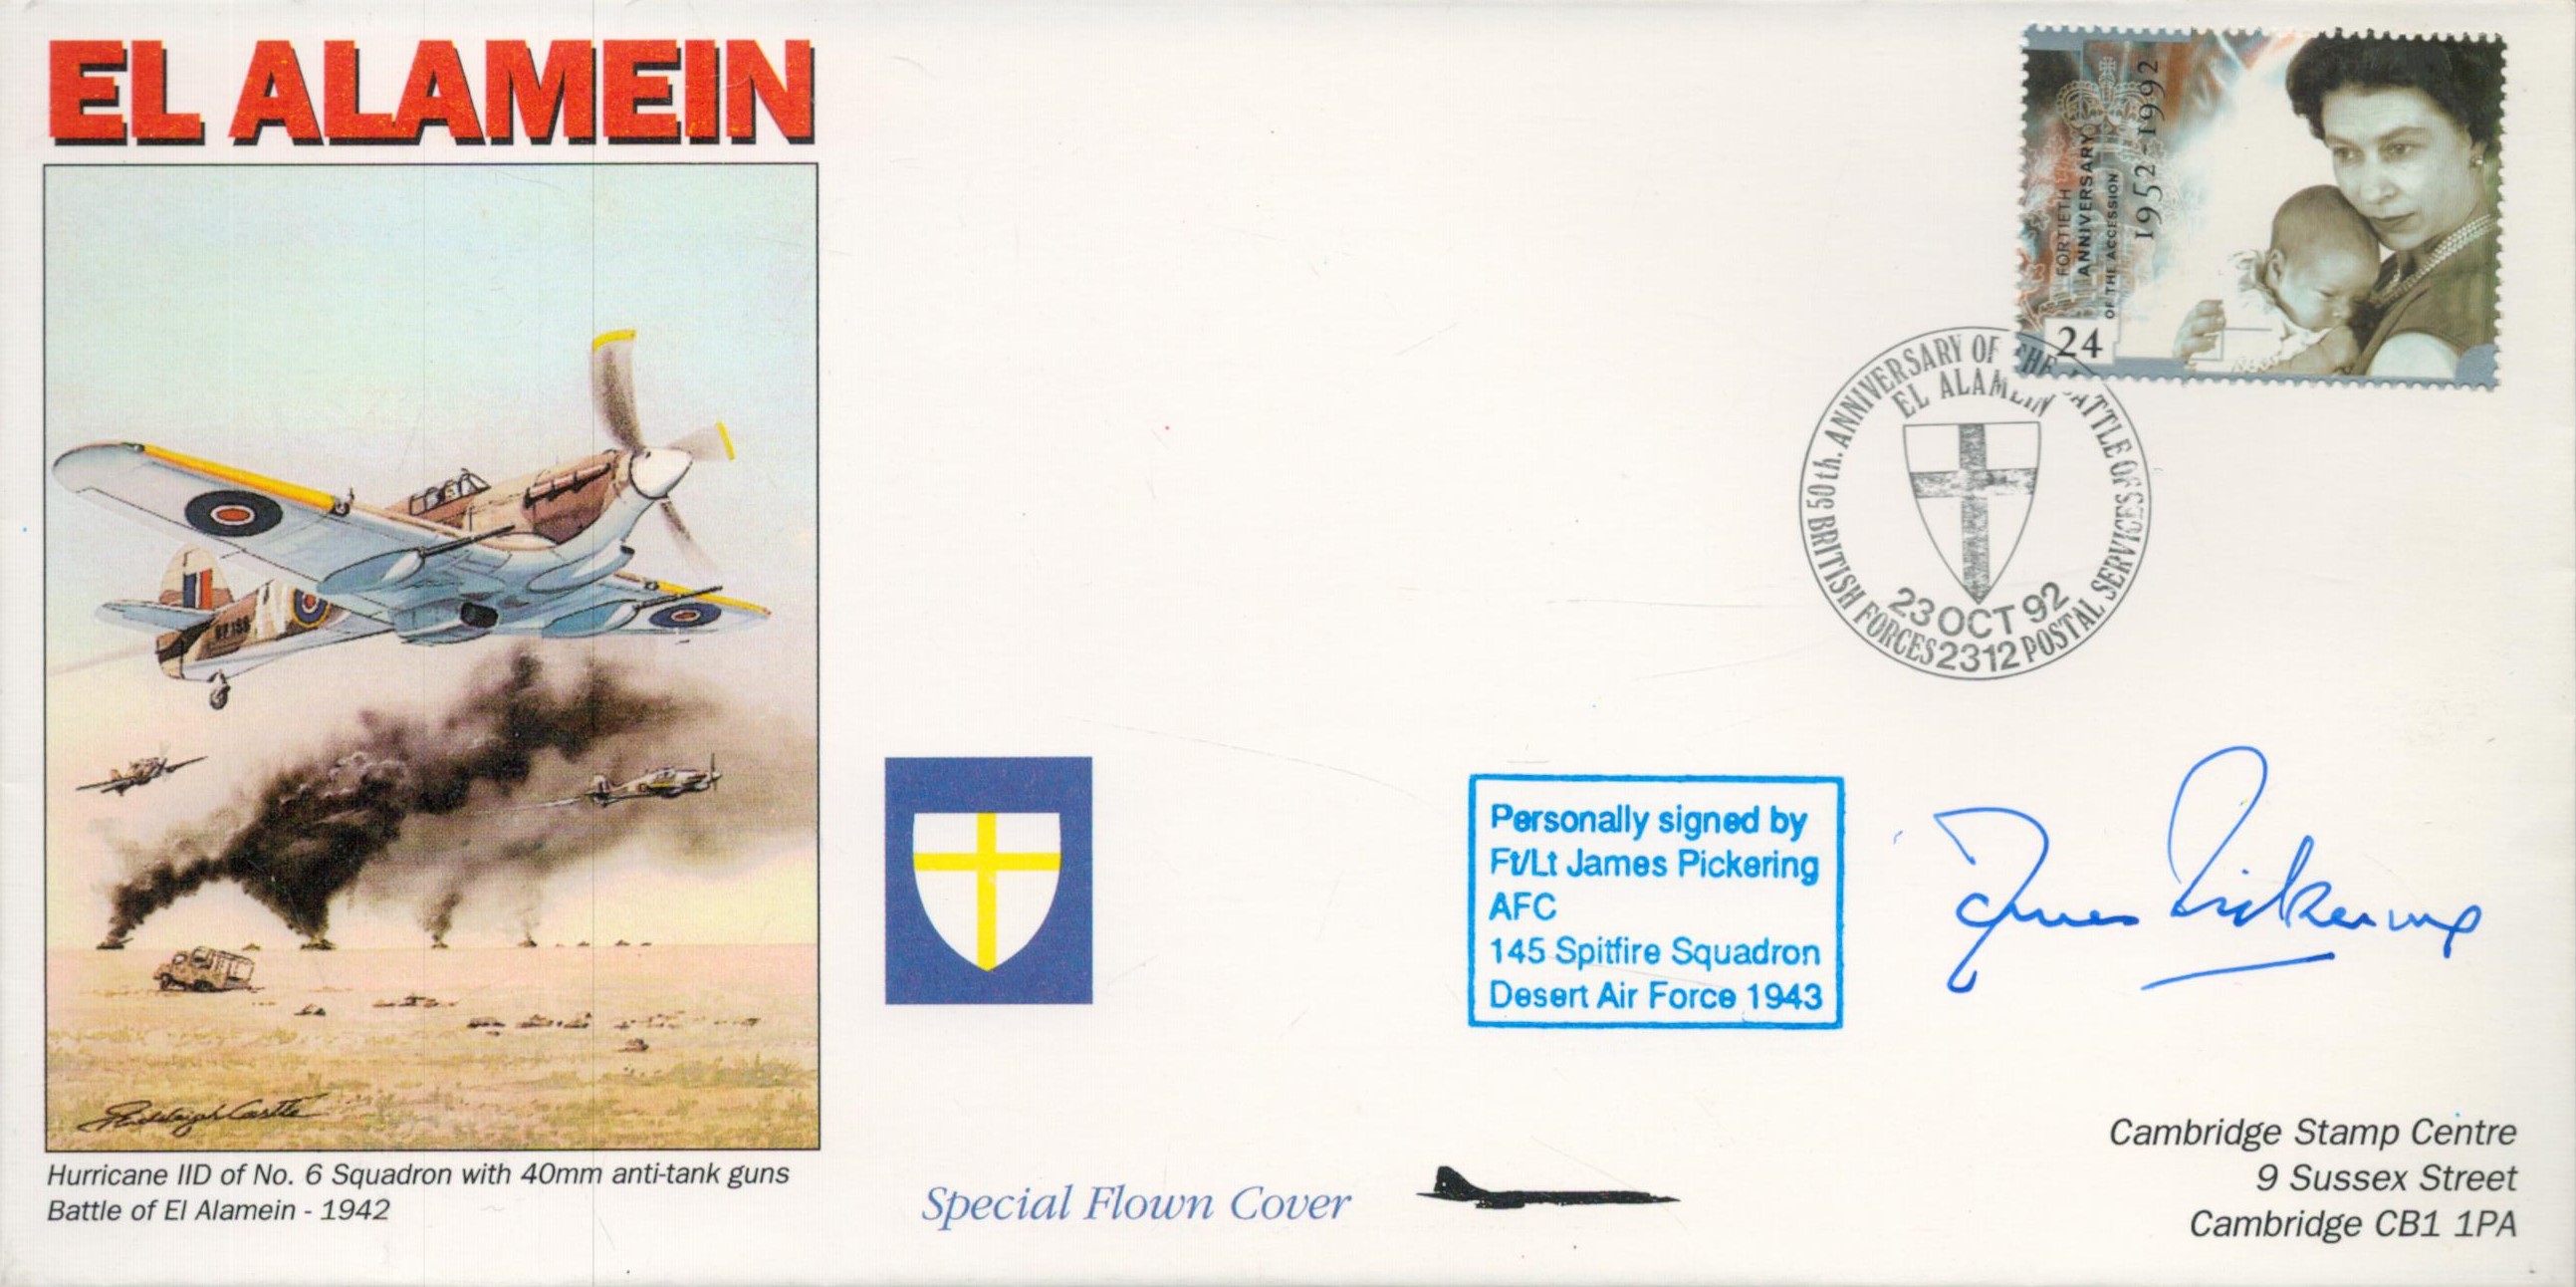 Tony Pickering 501 sqn WW2 RAF Battle of Britain fighter ace signed El Alamein Concorde flown cover.